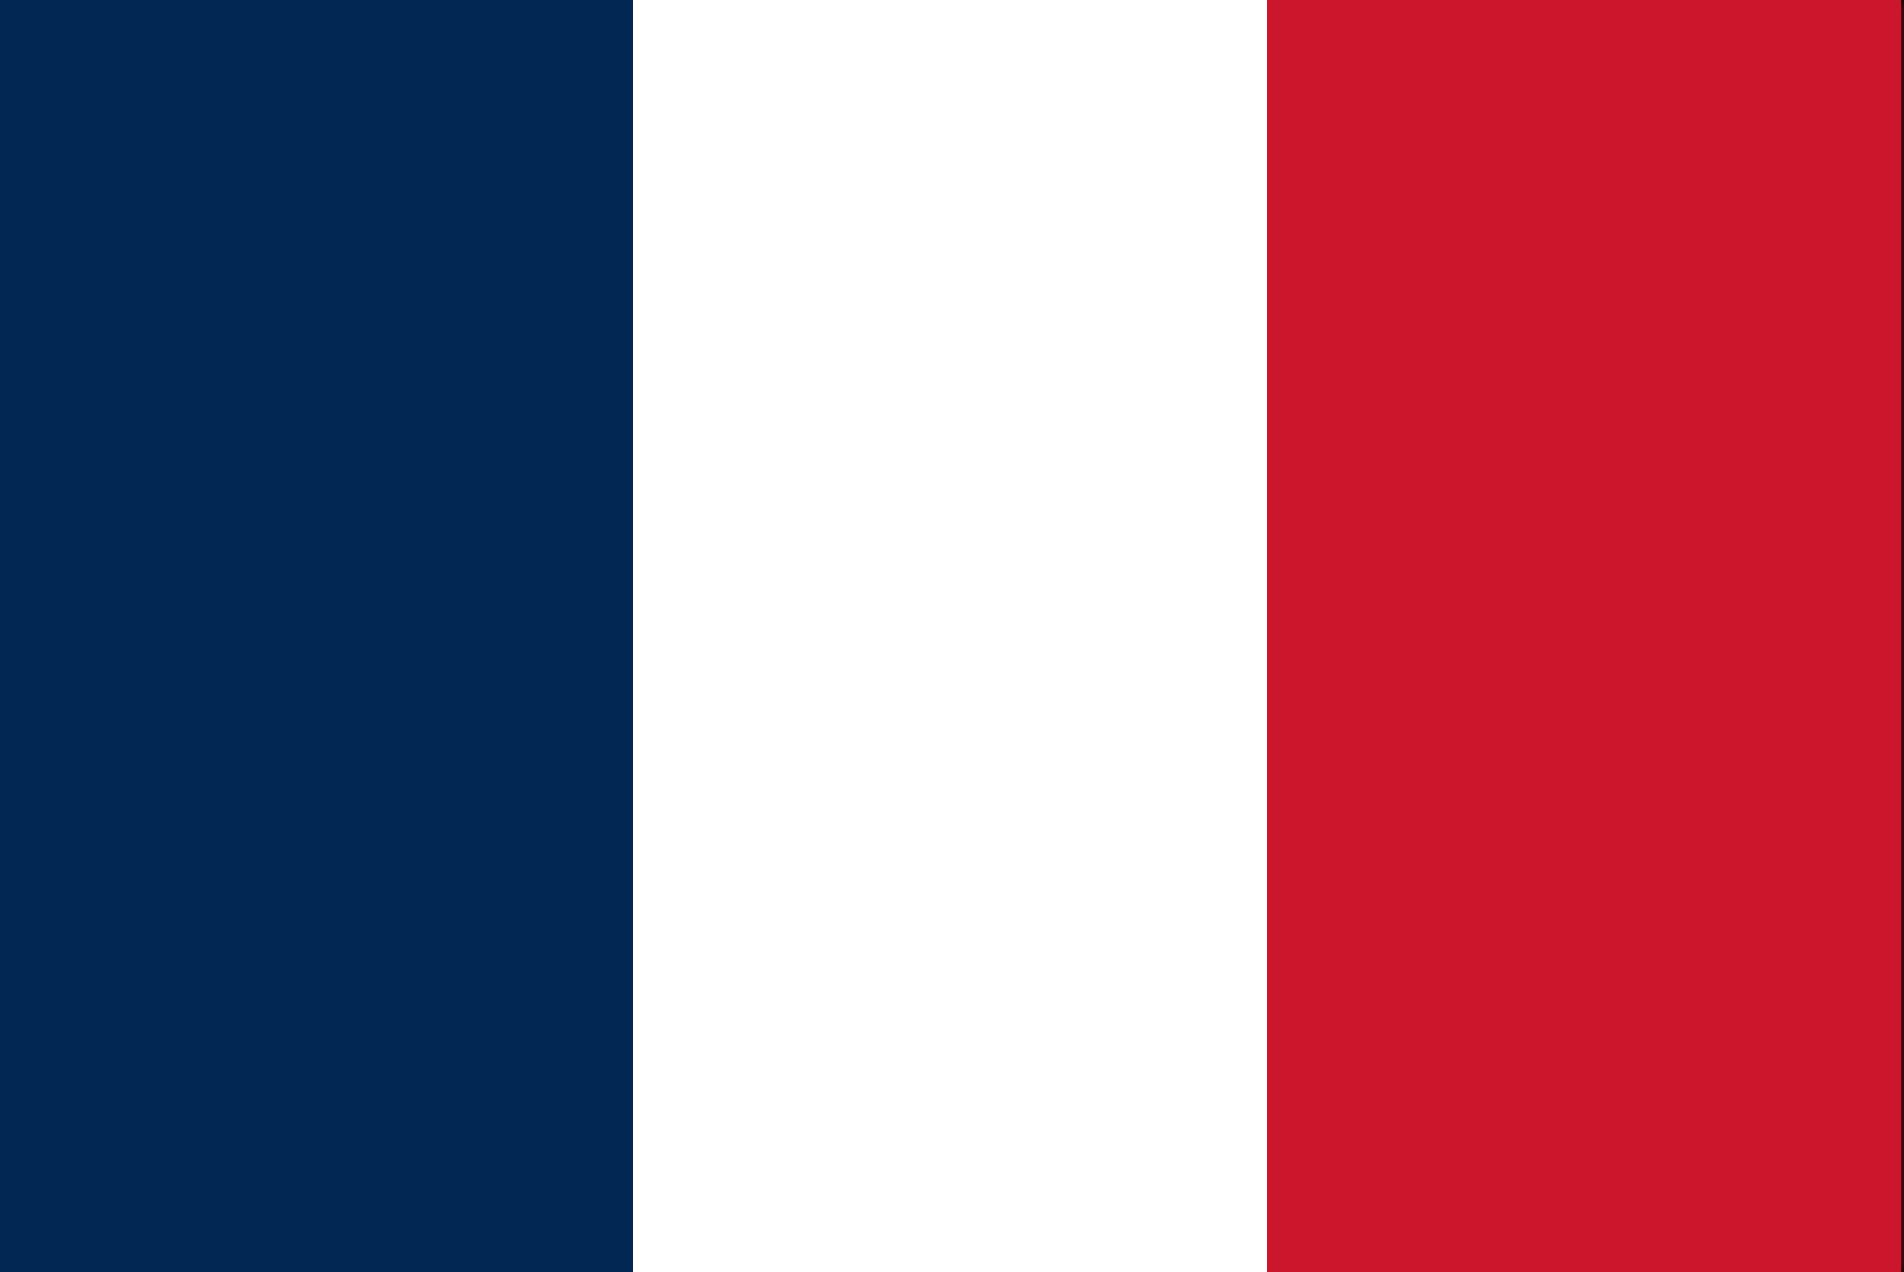 The national flag of France before 1976